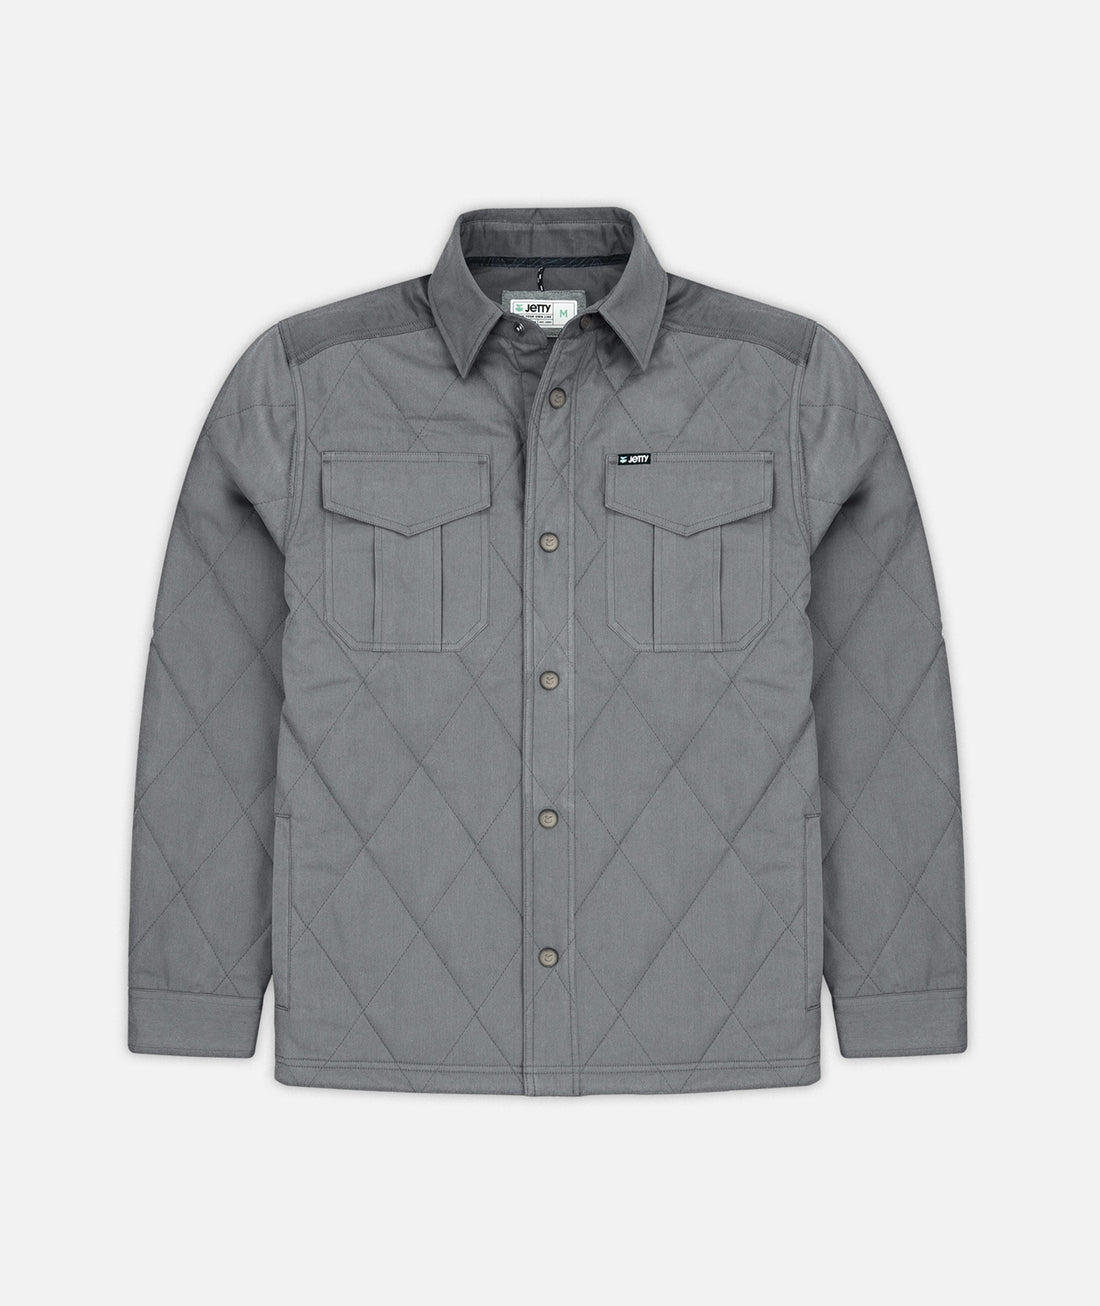 Dogwood Quilted Jacket